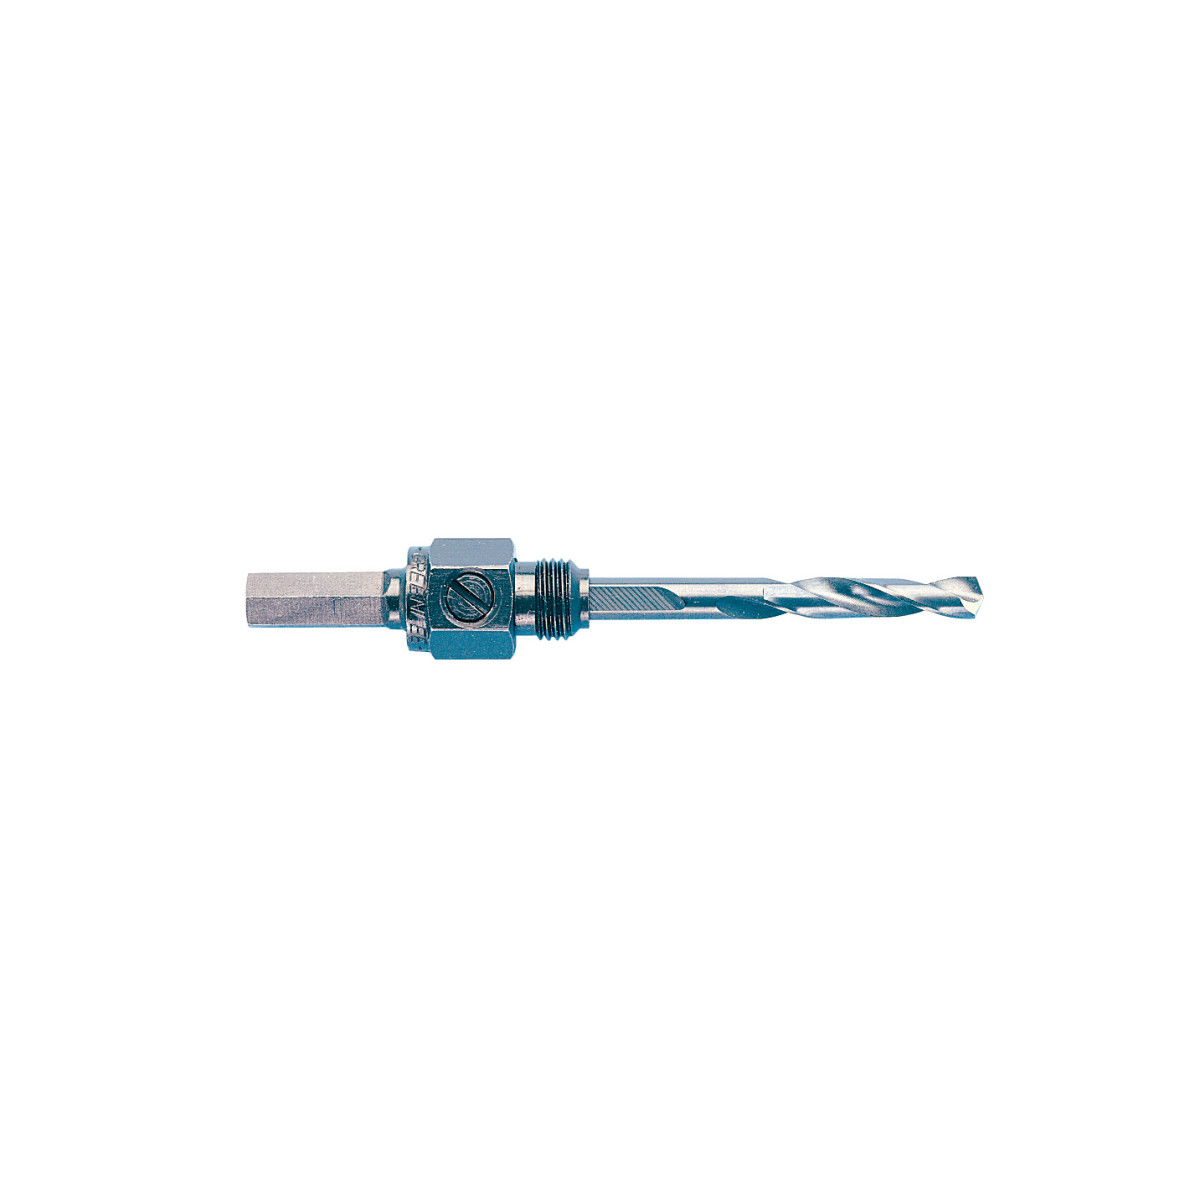 Shank Arbor with High-Speed Steel Pilot Drill Bit.  5/16" shank, 3/8" minimum chuck size.  Use with 9/16" - 1-3/16" Hole Saws.  The best arbor in the industry ensures a solid connection without any gaps or wobbling.  Arbors include replaceable, high-speed steel pilot drill.  Pilot drills have unique split-point tip design.  Use with Greenlee bi-metal hole saws, recessed light holesaws and carbide-grit hole saws (carbide-tipped pilot drill sold separately).  Can be used with Greenlee #901 or #904 bit extensions.